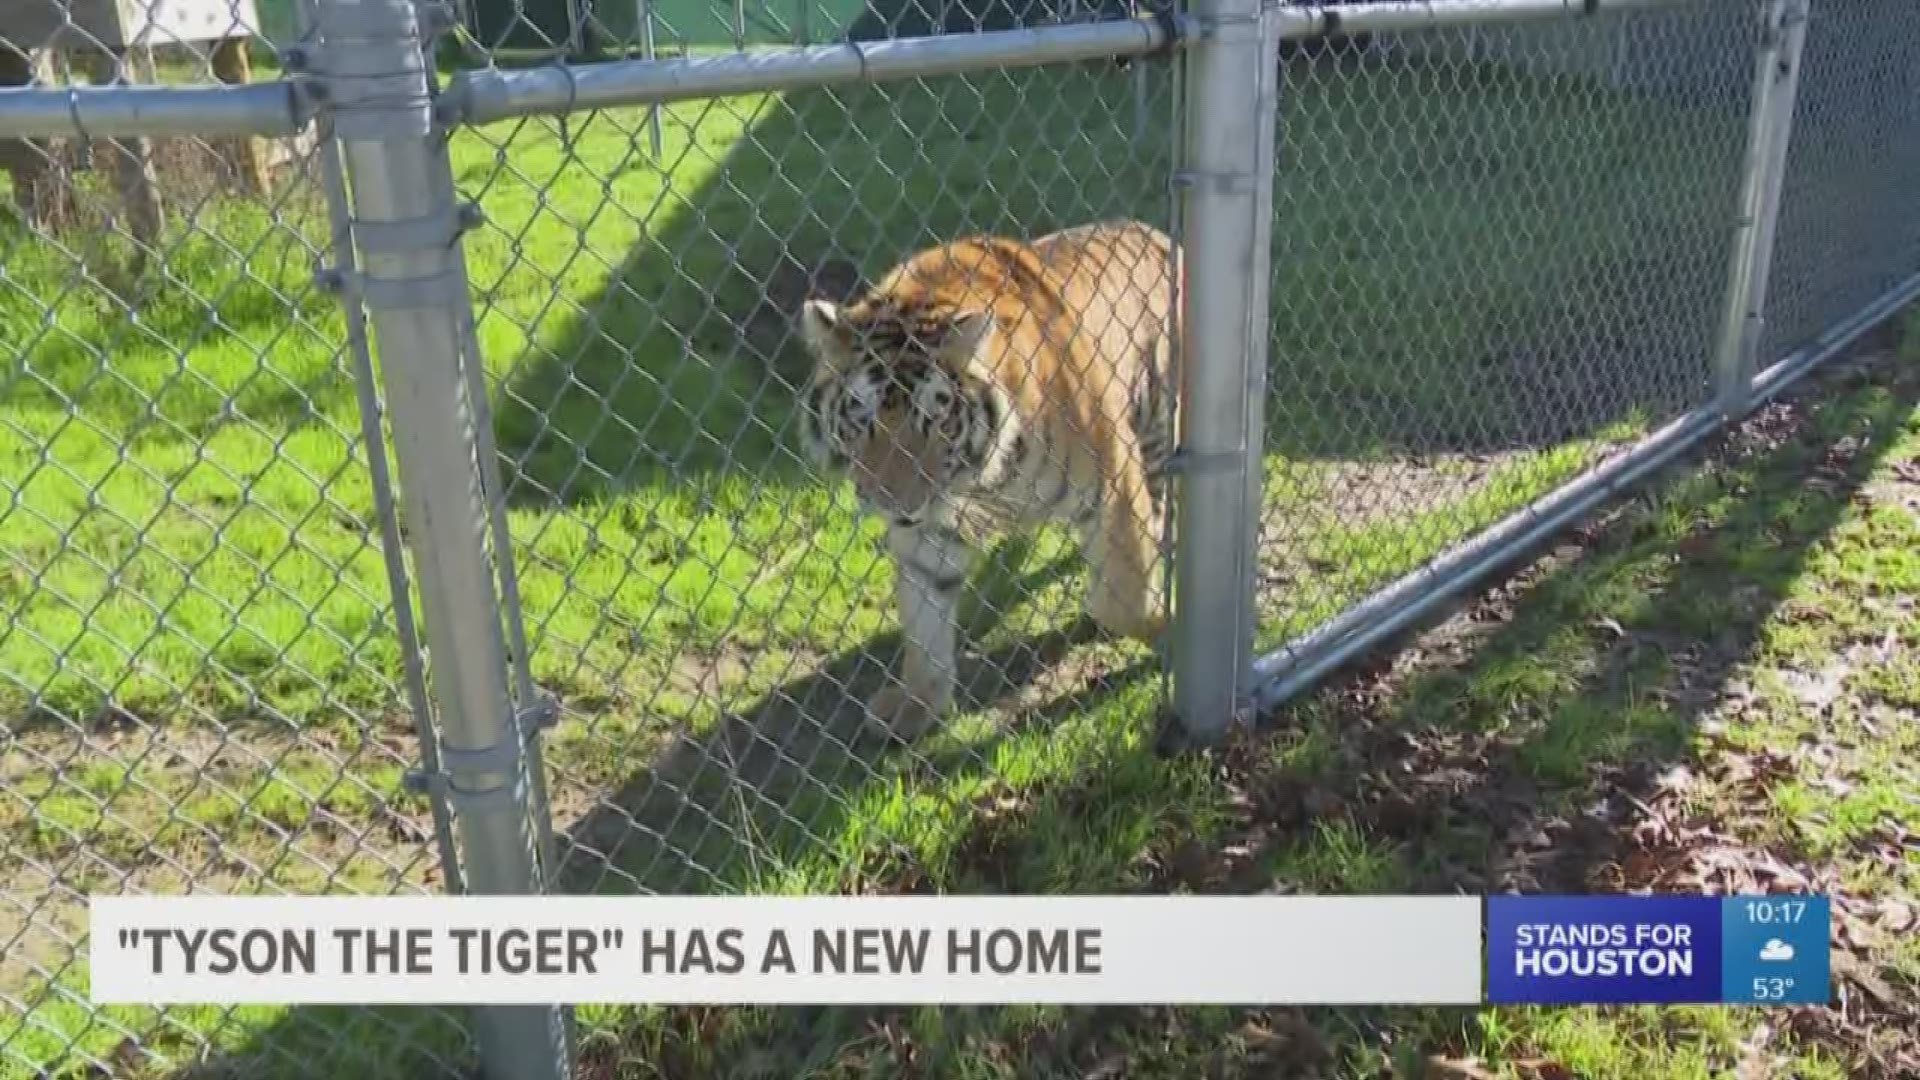 Life is good for a tiger that was found alone in a cage in a Houston home Monday. Tyson the tiger is now at Black Beauty Ranch in Henderson County and he's got a lot more room to stretch his legs.